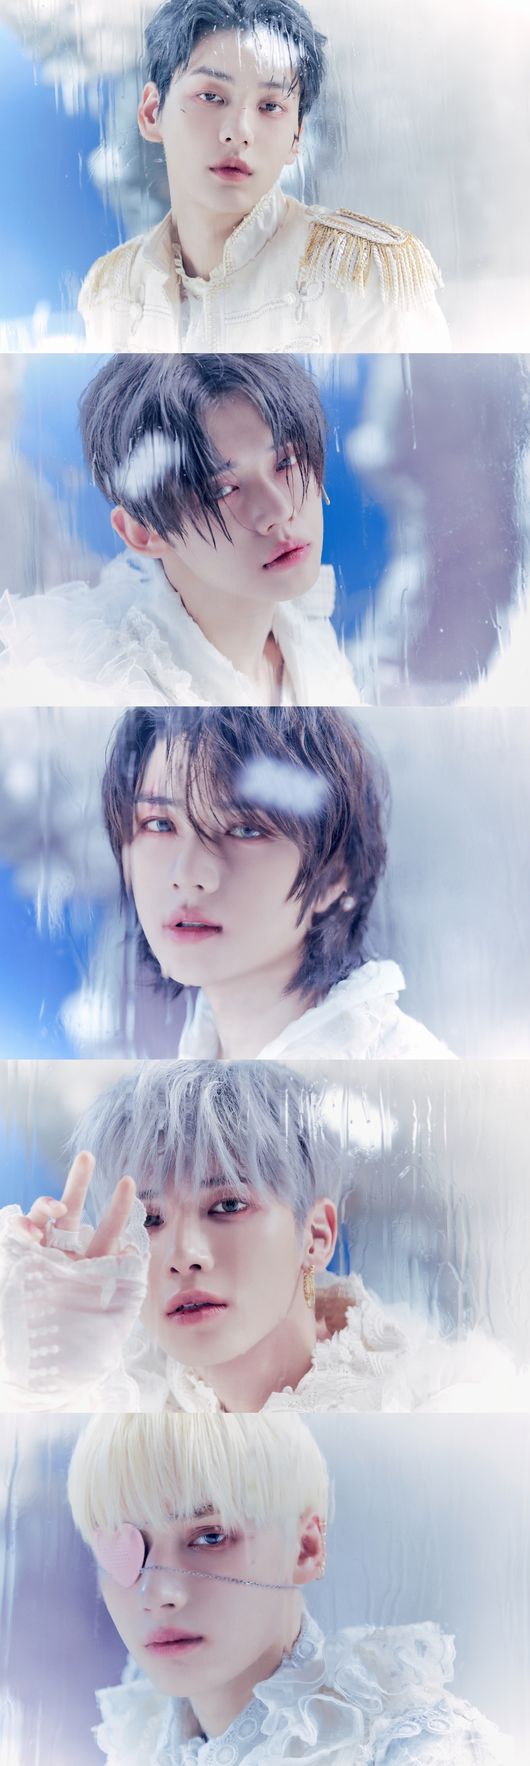 Group TOMORROW X Twogether released the first concept photo of the new album.TOMORROW X Twogether (Subin, Fed, Bum-gyu, Tae-hyun, and Humanning Kai) presented the concept photo WORLD version of the second regular album Chaos Chapter: FREEZE, which will be released on the 31st through the official SNS channel at 0:00 on the 16th.Earlier on the 15th at 6 p.m., Mood Teaser was surprised to reveal, giving Moa (MOA) around the world a joy waiting for the concept photo.Mood Teaser, along with the phrase WORLD, draws Eye-catching as the back of the members are expressed in black and white.The group concept photo, which was released, expressed a helpless and desolate mind.The wall is frozen and frozen, giving a desolate and cold feeling, and the members are seen in the background, and several arrows are inserted around the members, which stimulates curiosity.Members who have tried luxurious but bold costumes also rely on each other in the frozen ruins and capture their gaze with a lonely and desolate atmosphere.In the personal concept photo released Twogether, the five members are eyeing the camera with the effect that the ice melts.The members faint eyes attract Eye-catching, and the heart-shaped eye patch is also one of the points that stimulate curiosity.This concept photo of TOMORROW X Twogether can be found on the map posted on the official home page.Pressing the pins on the map of the home page adds speciality in a unique way to appreciate more concept photos such as group cuts and individual cuts.As such, TOMORROW X Twogether is raising expectations for a comeback by releasing concept photo of WORLD version starting with concept trailer on the 11th.On the 18th and 20th, the company will continue to show the BOY and YOU versions.On the other hand, TOMORROW X Twogethers new album Chaos: FREEZE will be released on the 31st.TOMORROW X Twogether has surpassed 520,000 pre-orders in six days with this album, and once again it has its own record, it is causing a hot blast early on.big hit music